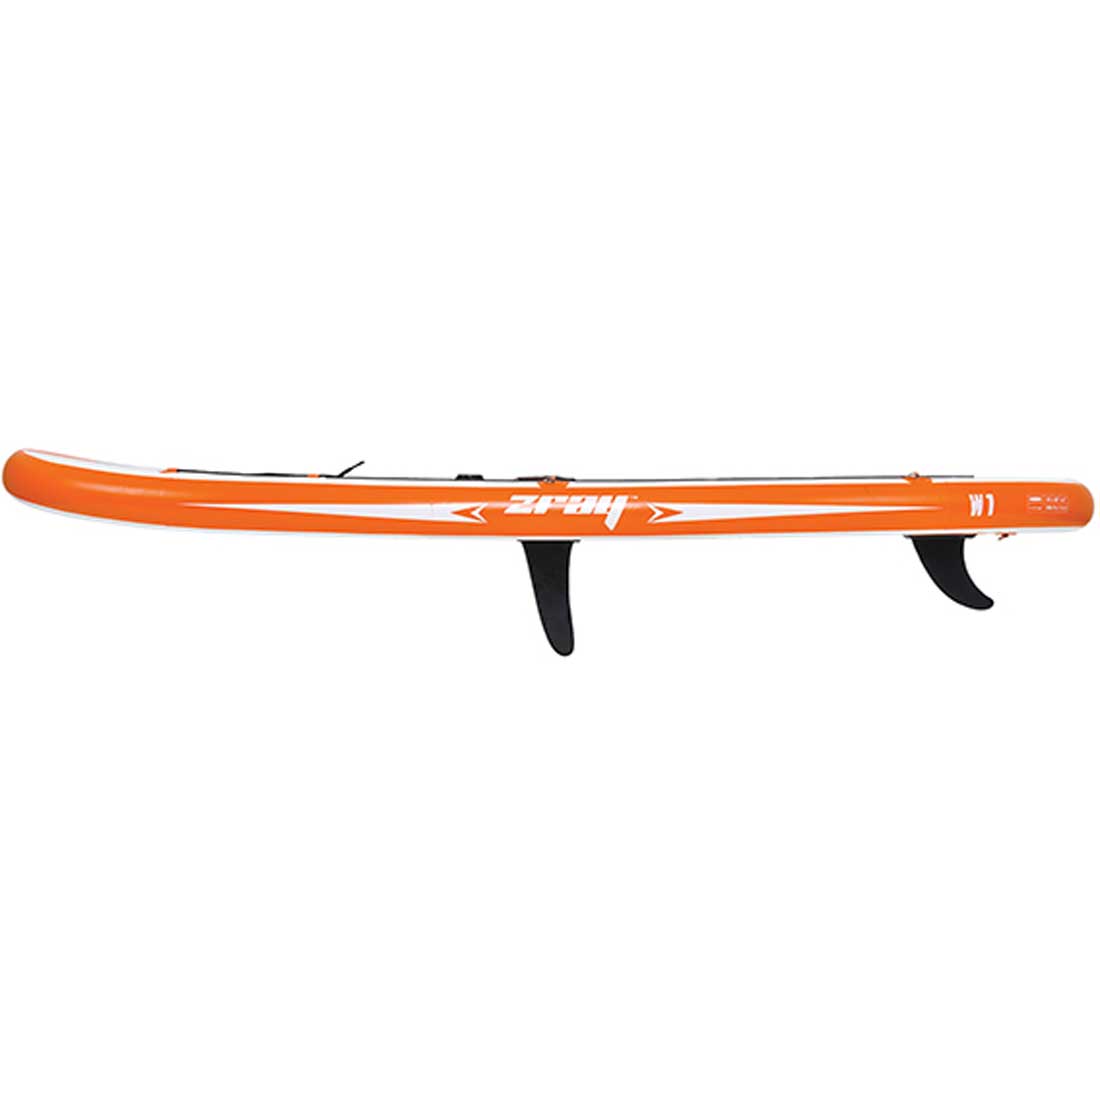 Stand up paddle board W1 ZRAY - Ailerons